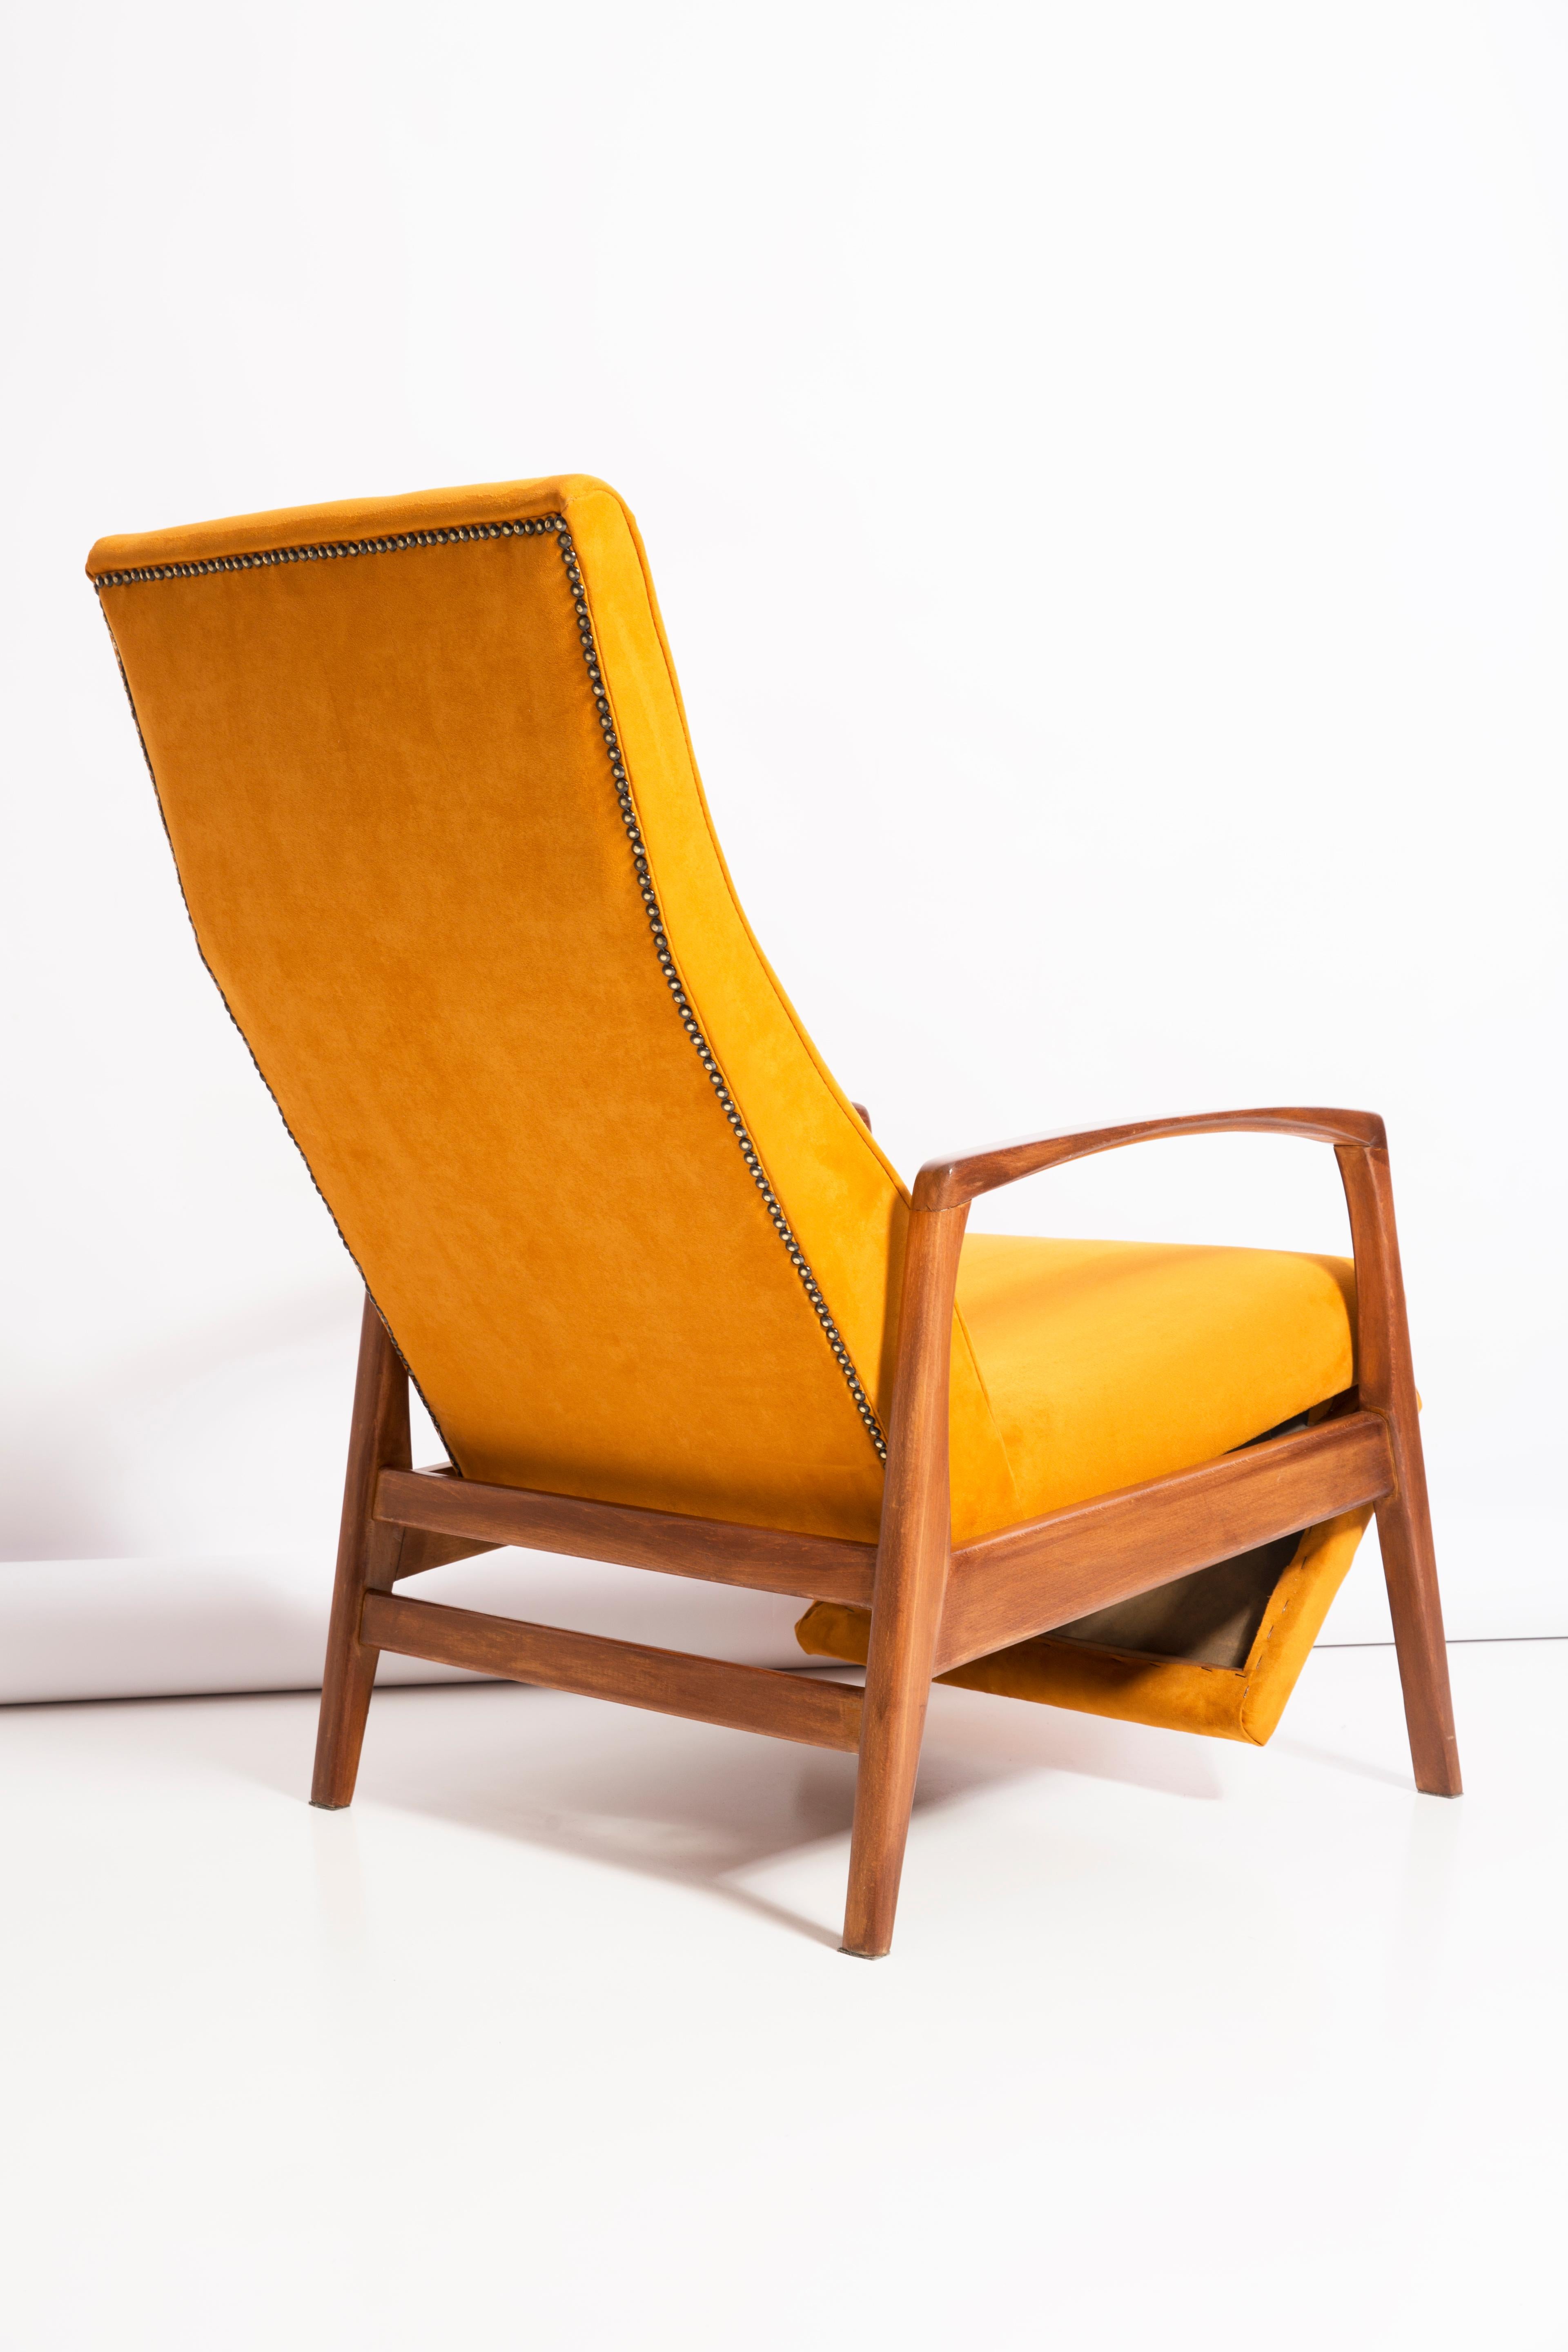 20th Century Yellow Fold-Out Armchair, Europe, 1960s For Sale 1